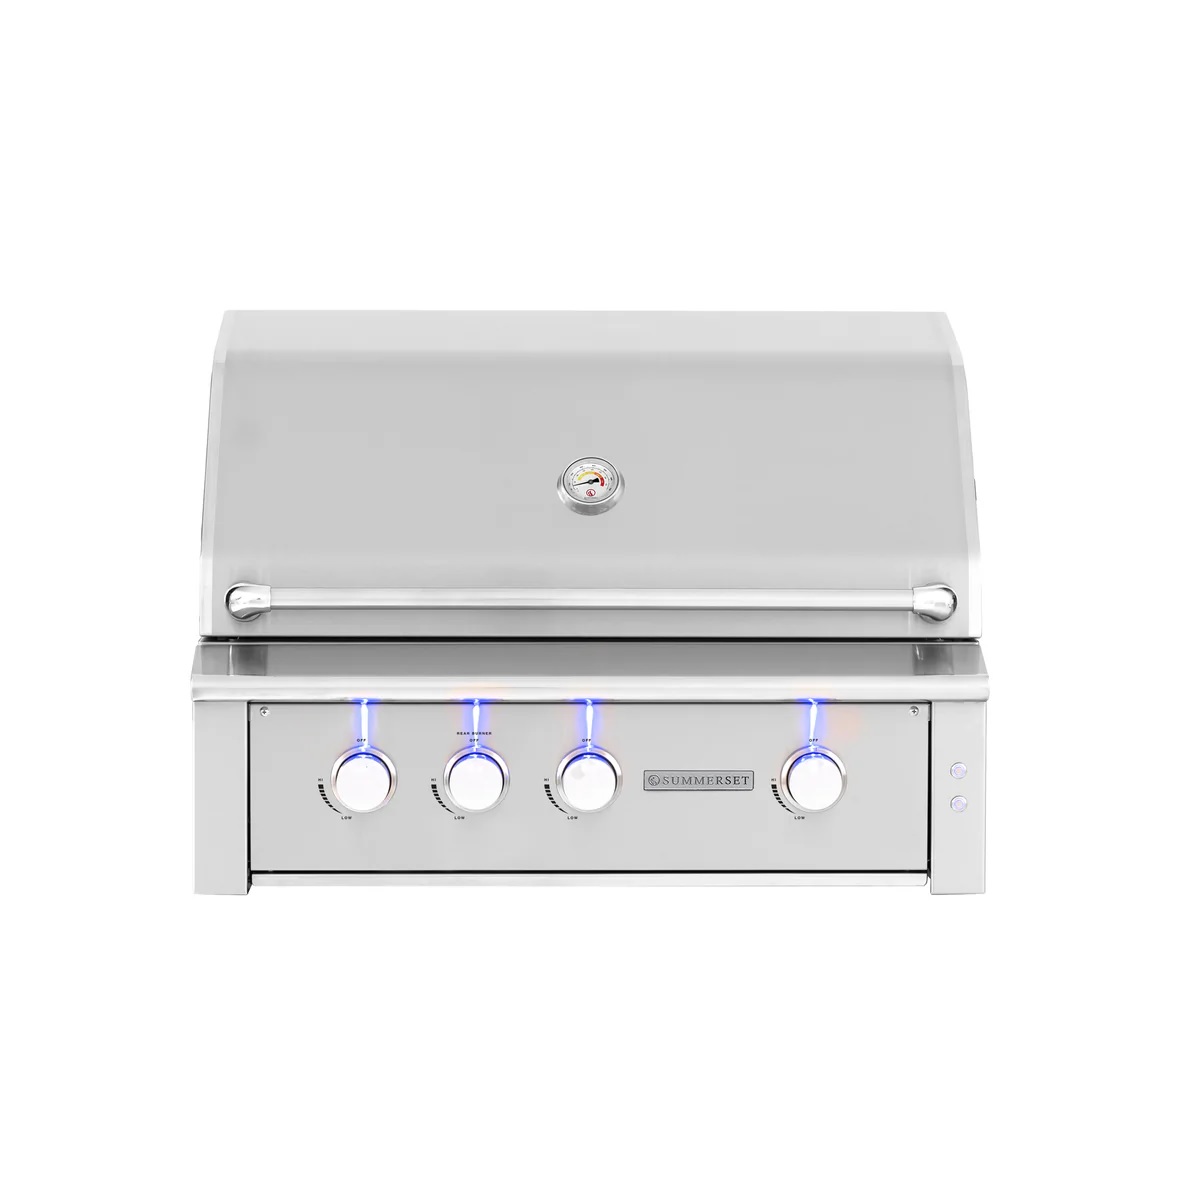 alturi grill u-tube series 36 inch natural gas product image